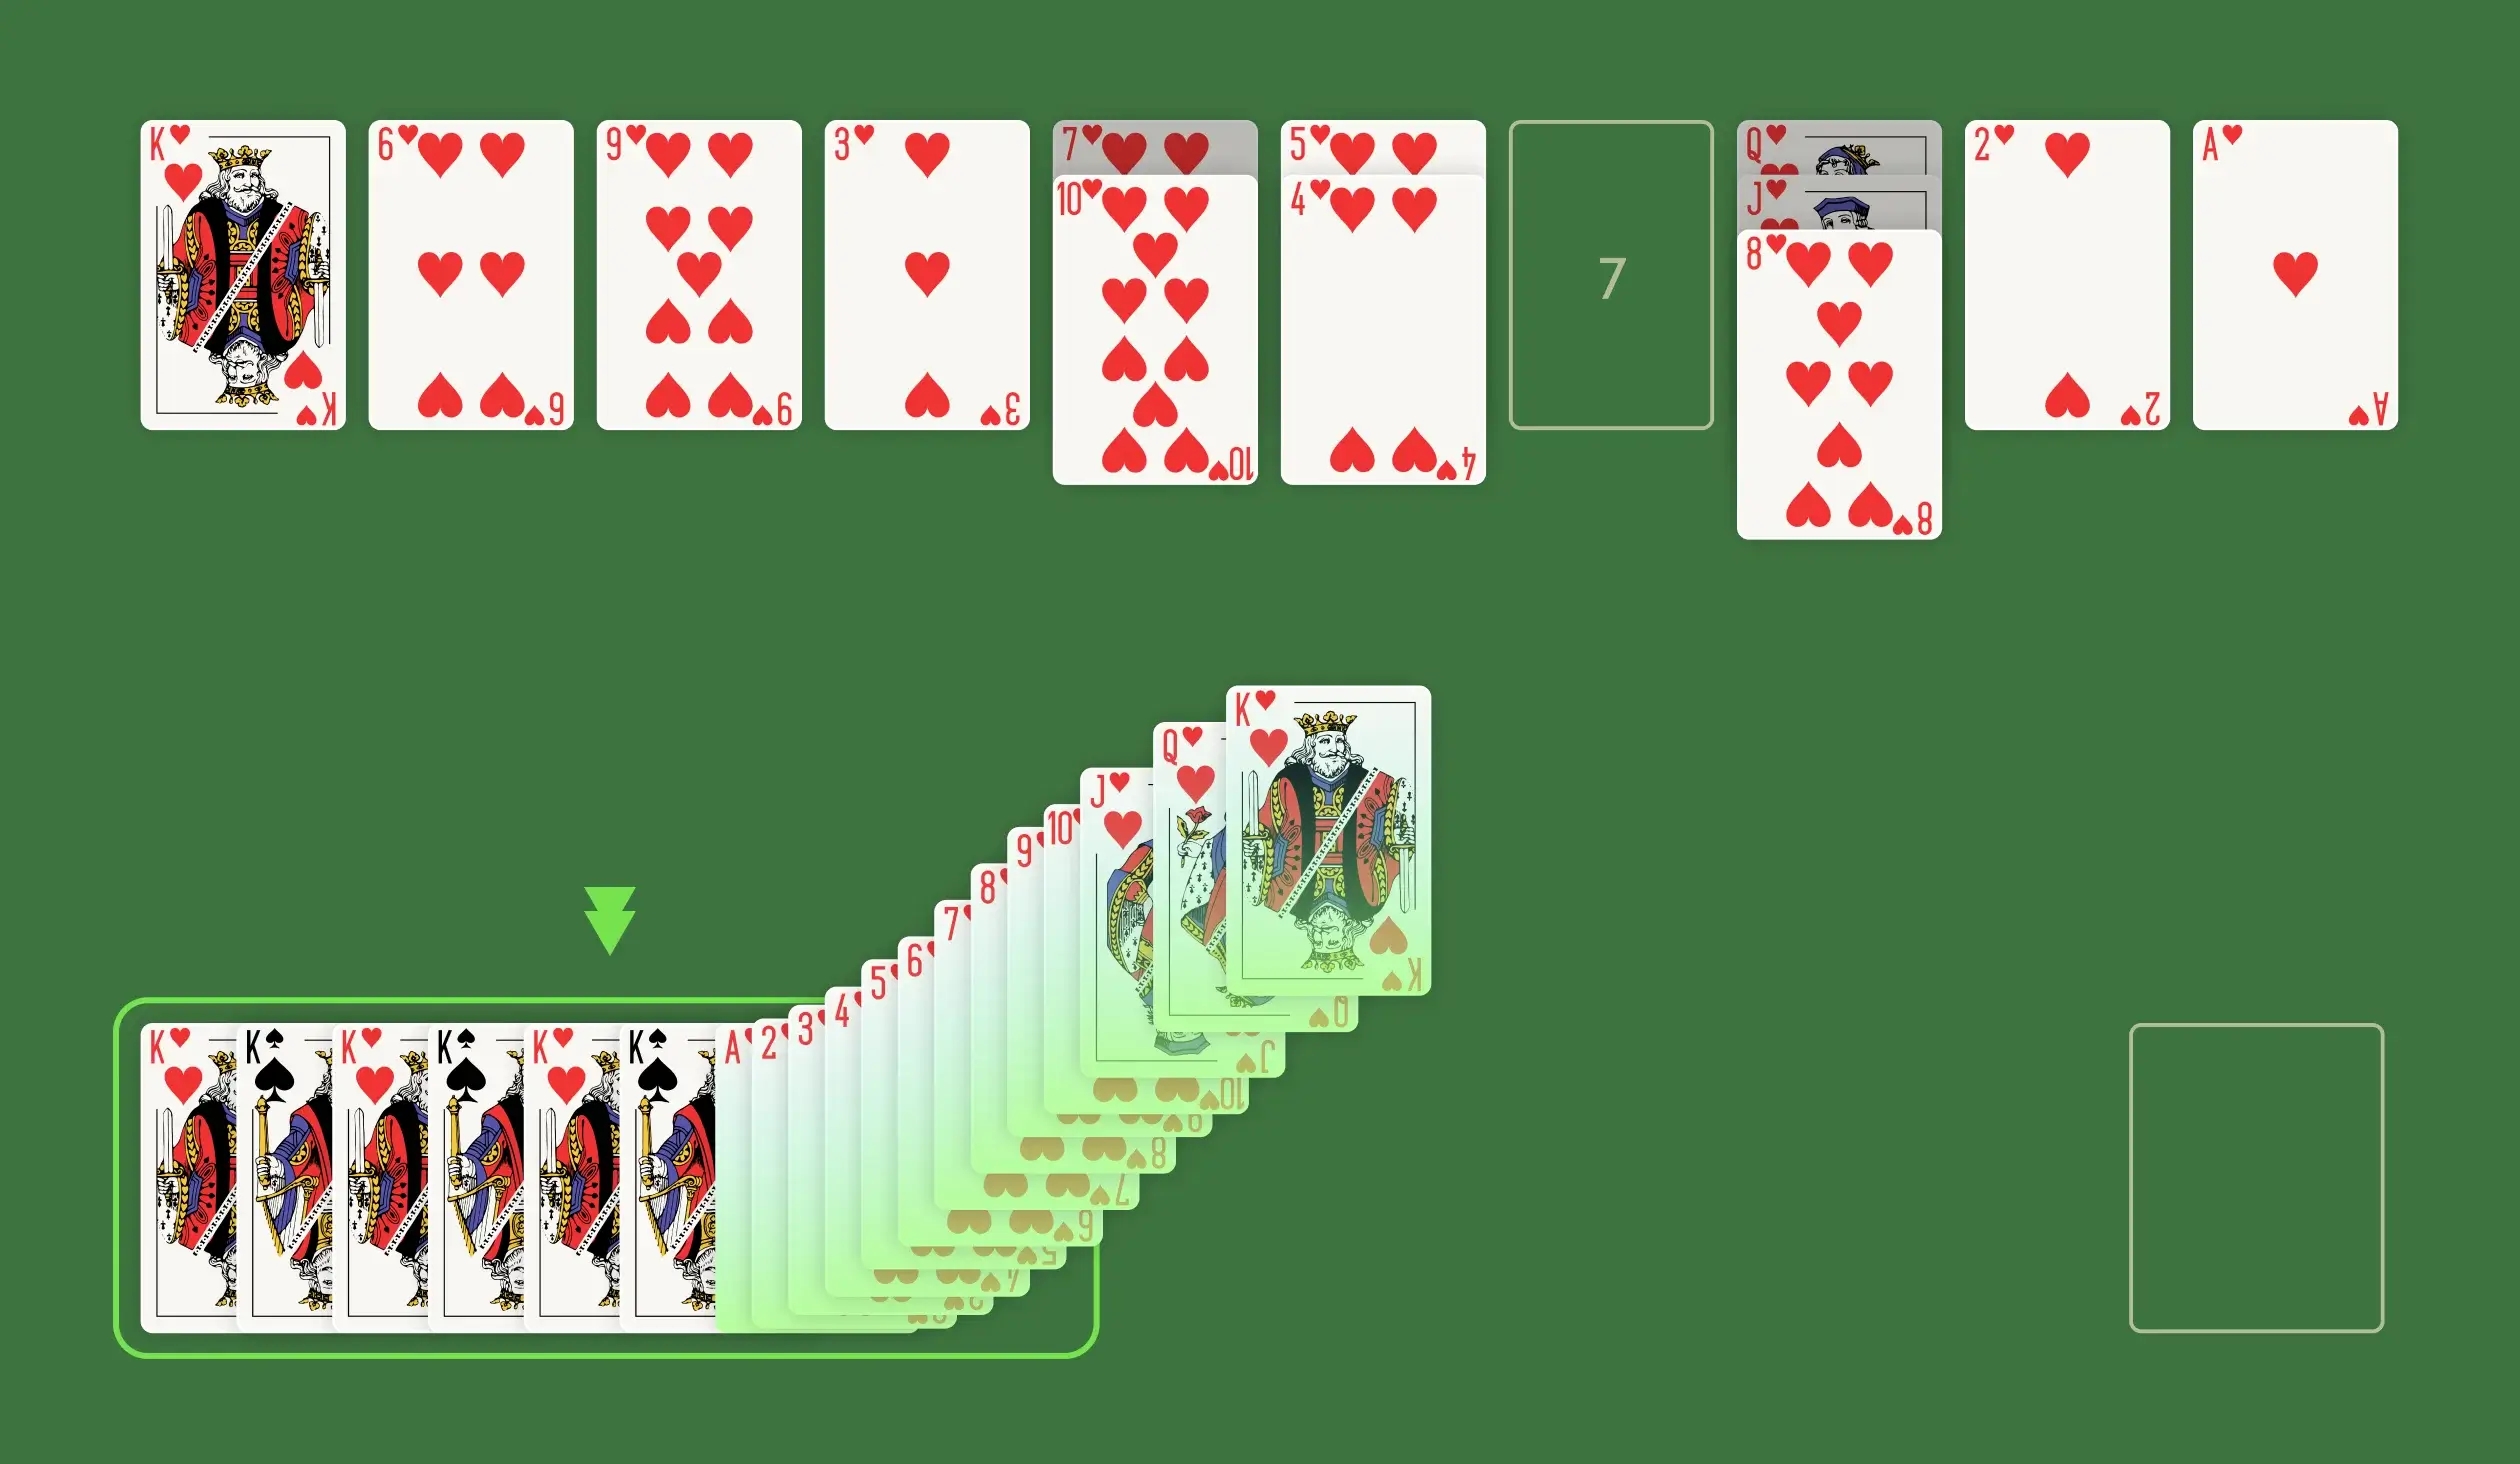 Once you start playing the game, your strategies will lead you in the direction to win. Forming two complete suits from King to Ace will effectively declare you the winner. One of the popular strategies used to win is to focus on building from high-value cards. While low-value cards are important, high-value cards open more possibilities for you.